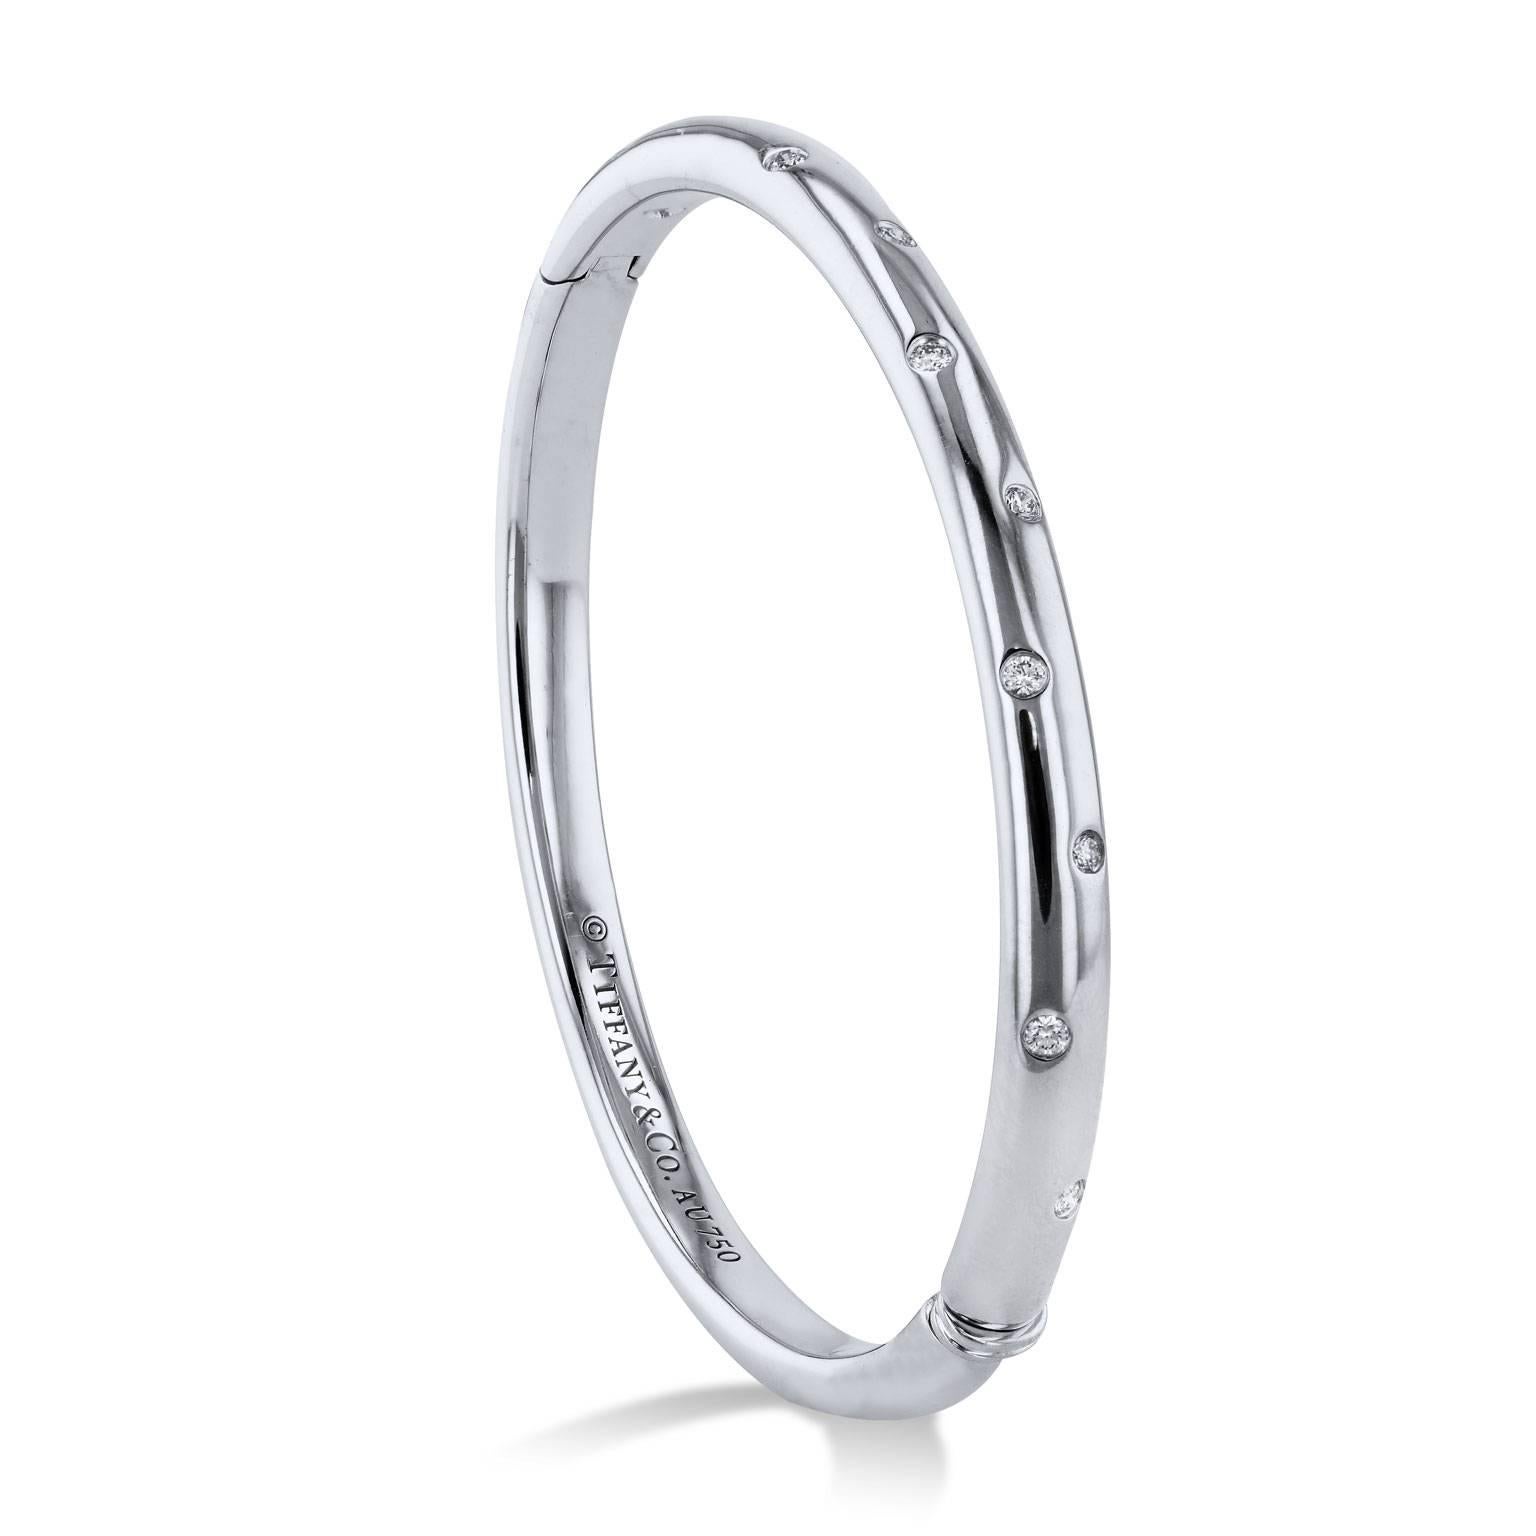 Enjoy this previously loved Tiffany & Co. Etoile Collection 18 karat white gold bangle bracelet featuring 0.21 carat of diamond in flush setting (size medium; fits 6.25 inch wrist).